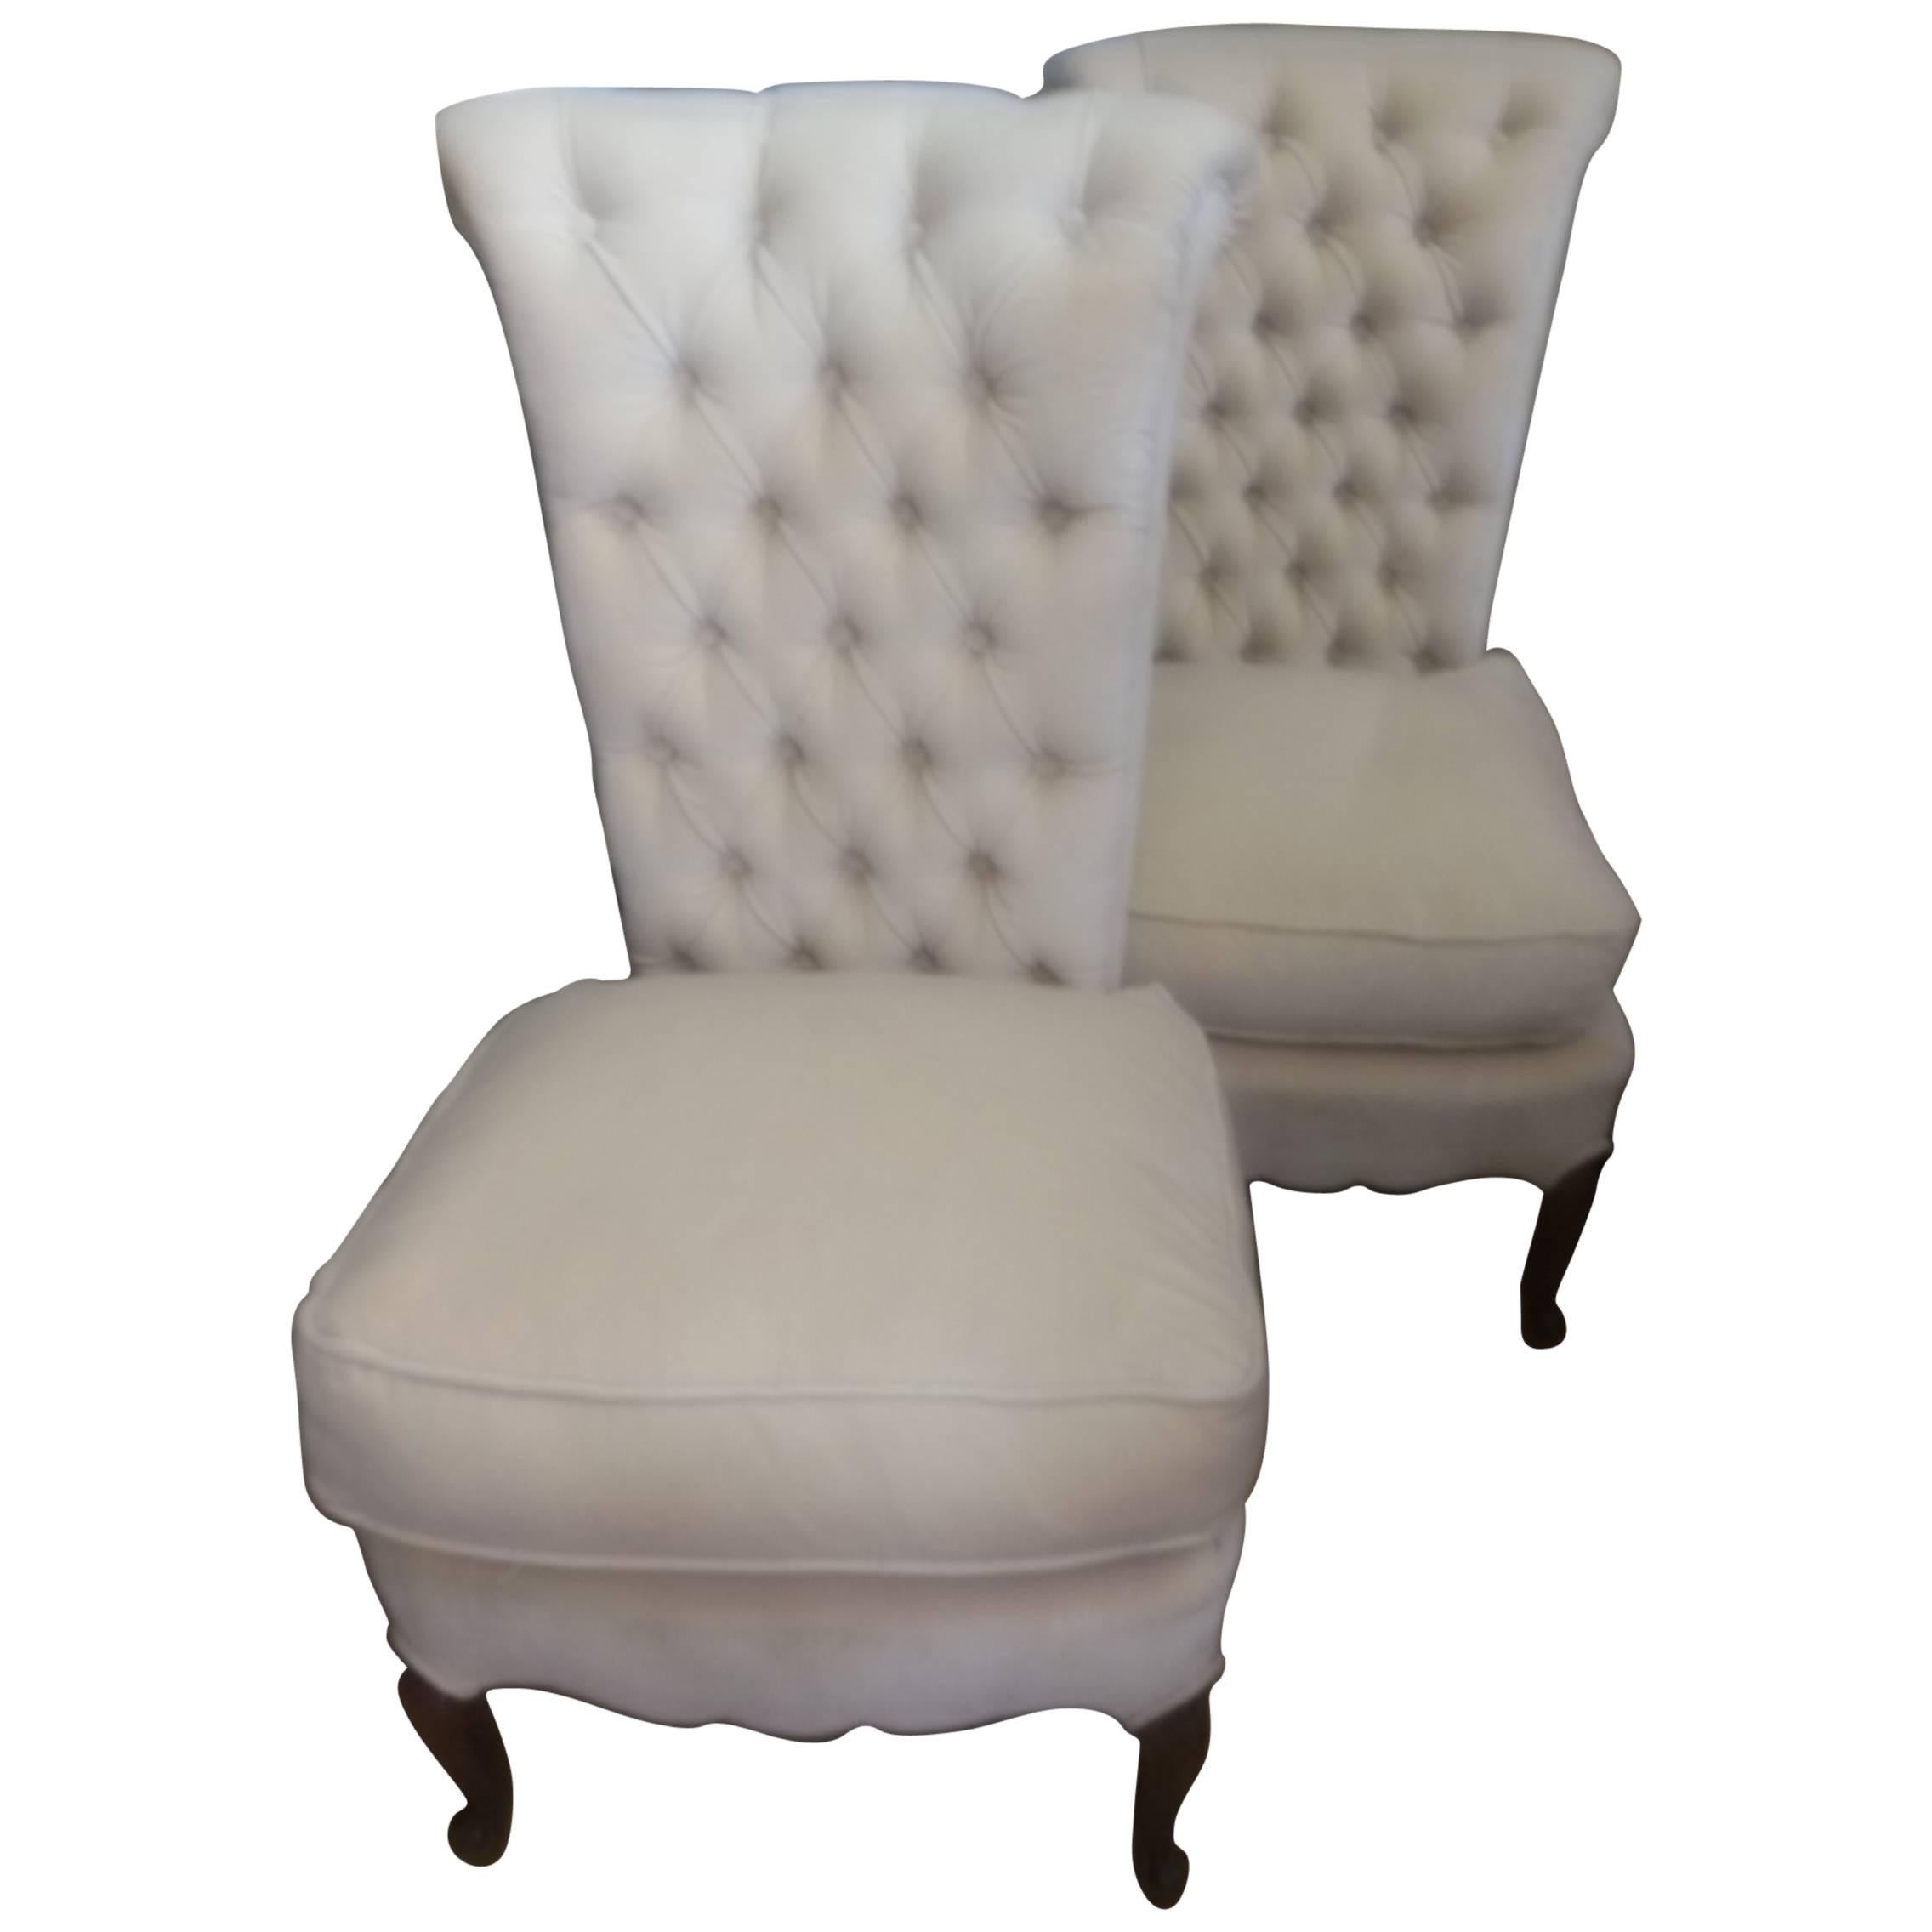 Pair of High Style Vintage Tufted Slipper Chairs For Sale